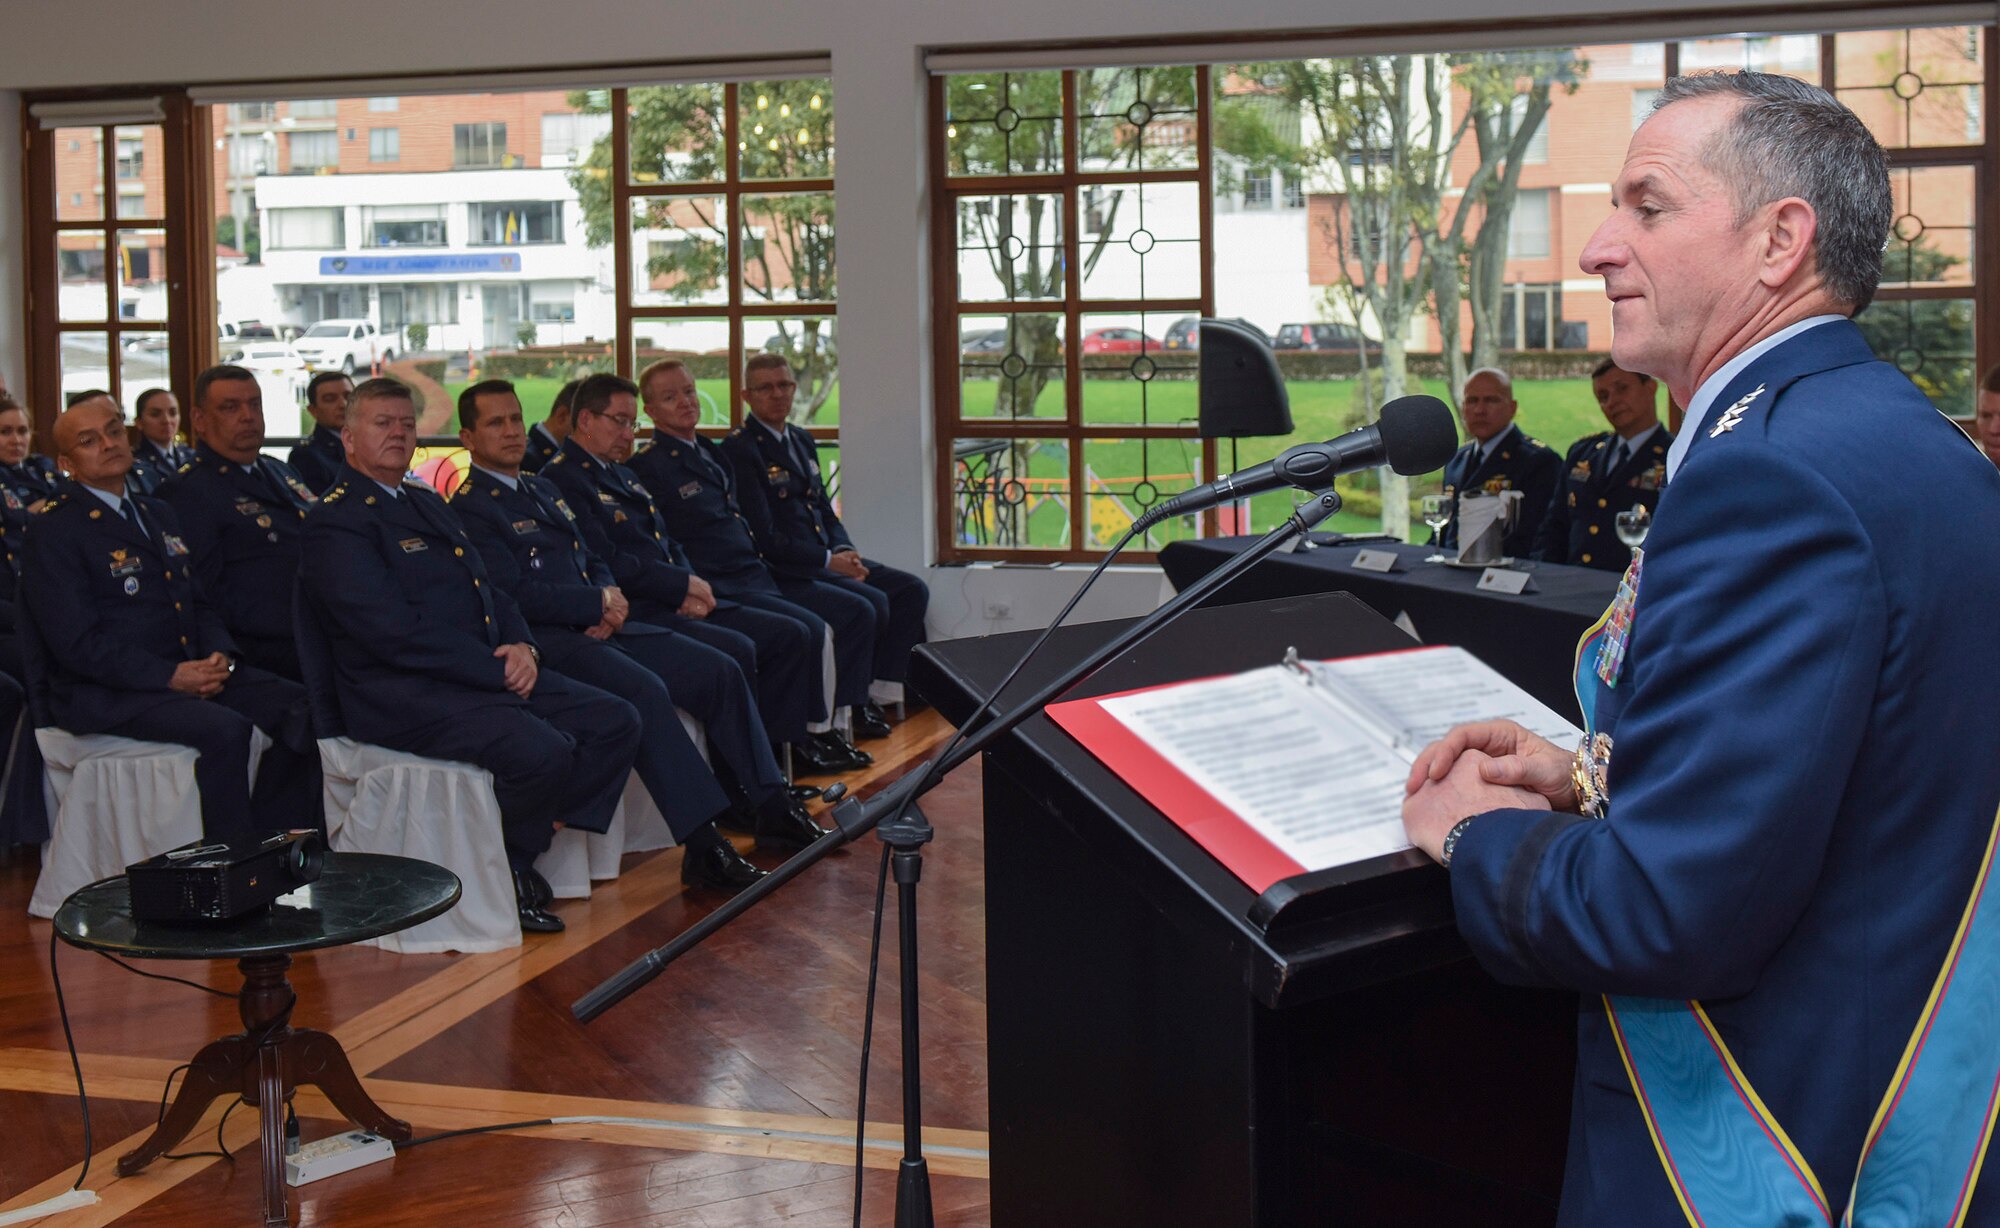 Air Force Chief of Staff Gen. David L. Goldfein addresses Colombian Air Force War College students at the Canton Norte in Bogota, Colombia, Nov. 15, 2018. Goldfein's visit to the country and U.S. engagement in the region reflect the enduring promise of friendship, partnership and solidarity within the Americas. (U.S. Air Force photo by Tech Sgt. Anthony Nelson Jr.)